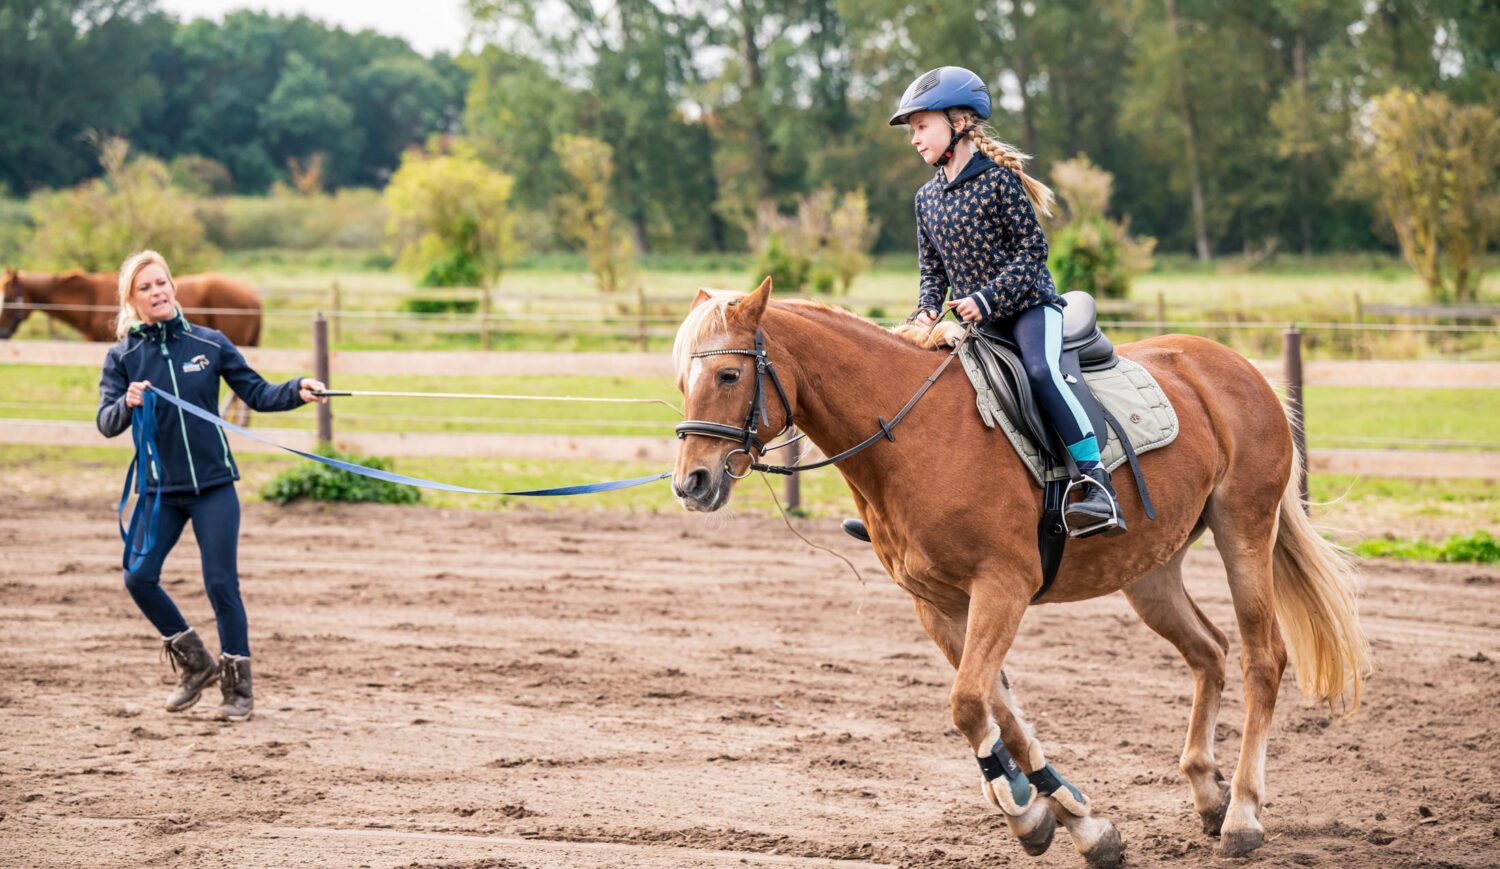 Pony rides, vaulting and guided rides for children from 3 years: the equestrian farm in Boltenhagen is the ideal vacation destination for horse lovers © TMV/Tiemann